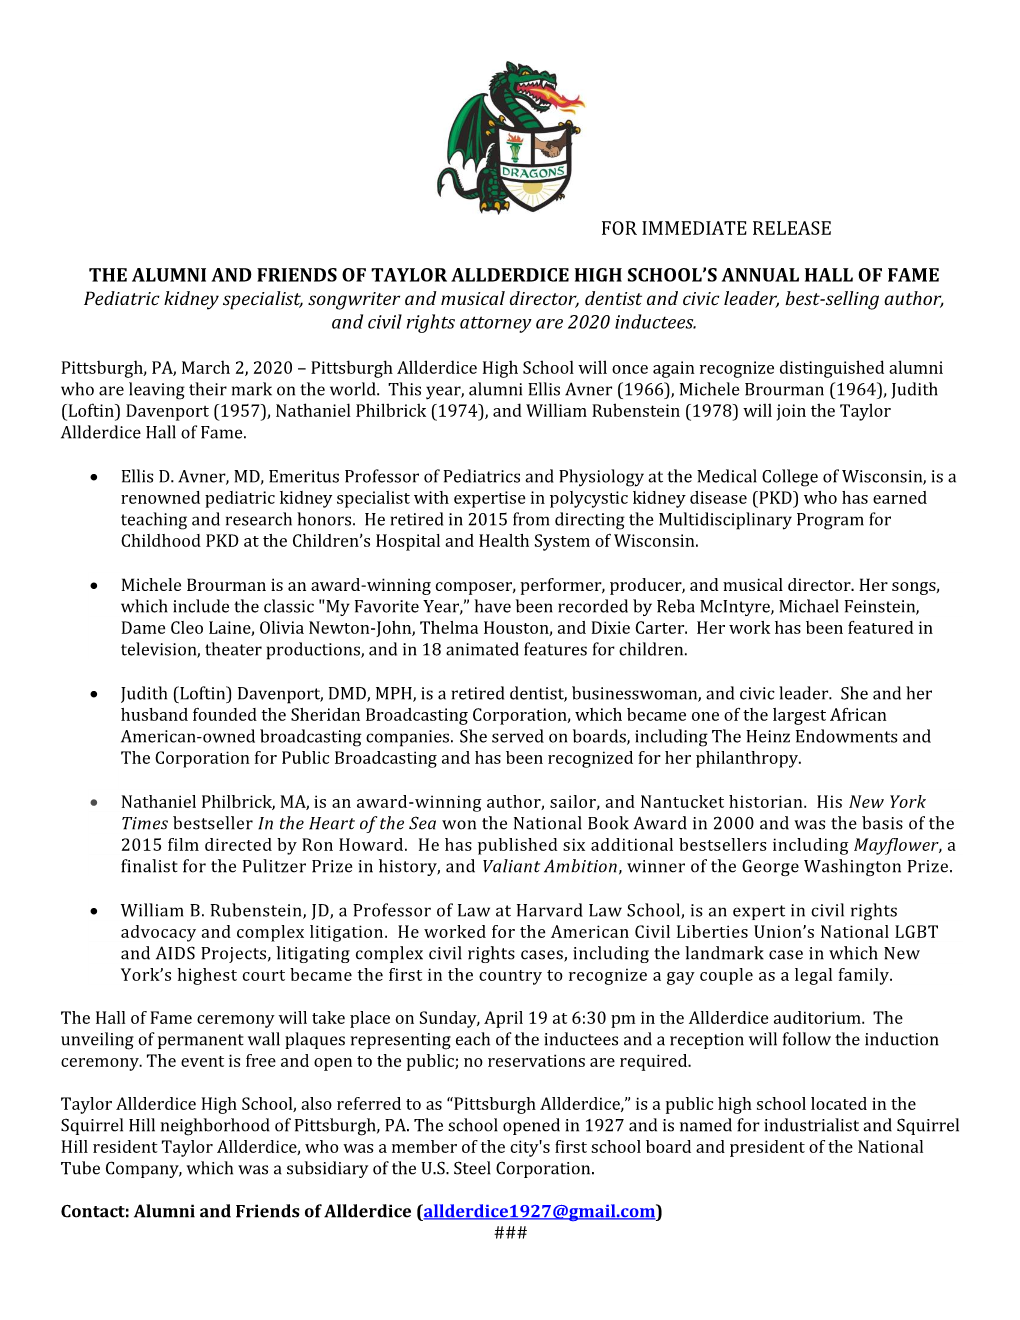 FOR IMMEDIATE RELEASE the ALUMNI and FRIENDS of TAYLOR ALLDERDICE HIGH SCHOOL's ANNUAL HALL of FAME Pediatric Kidney Special